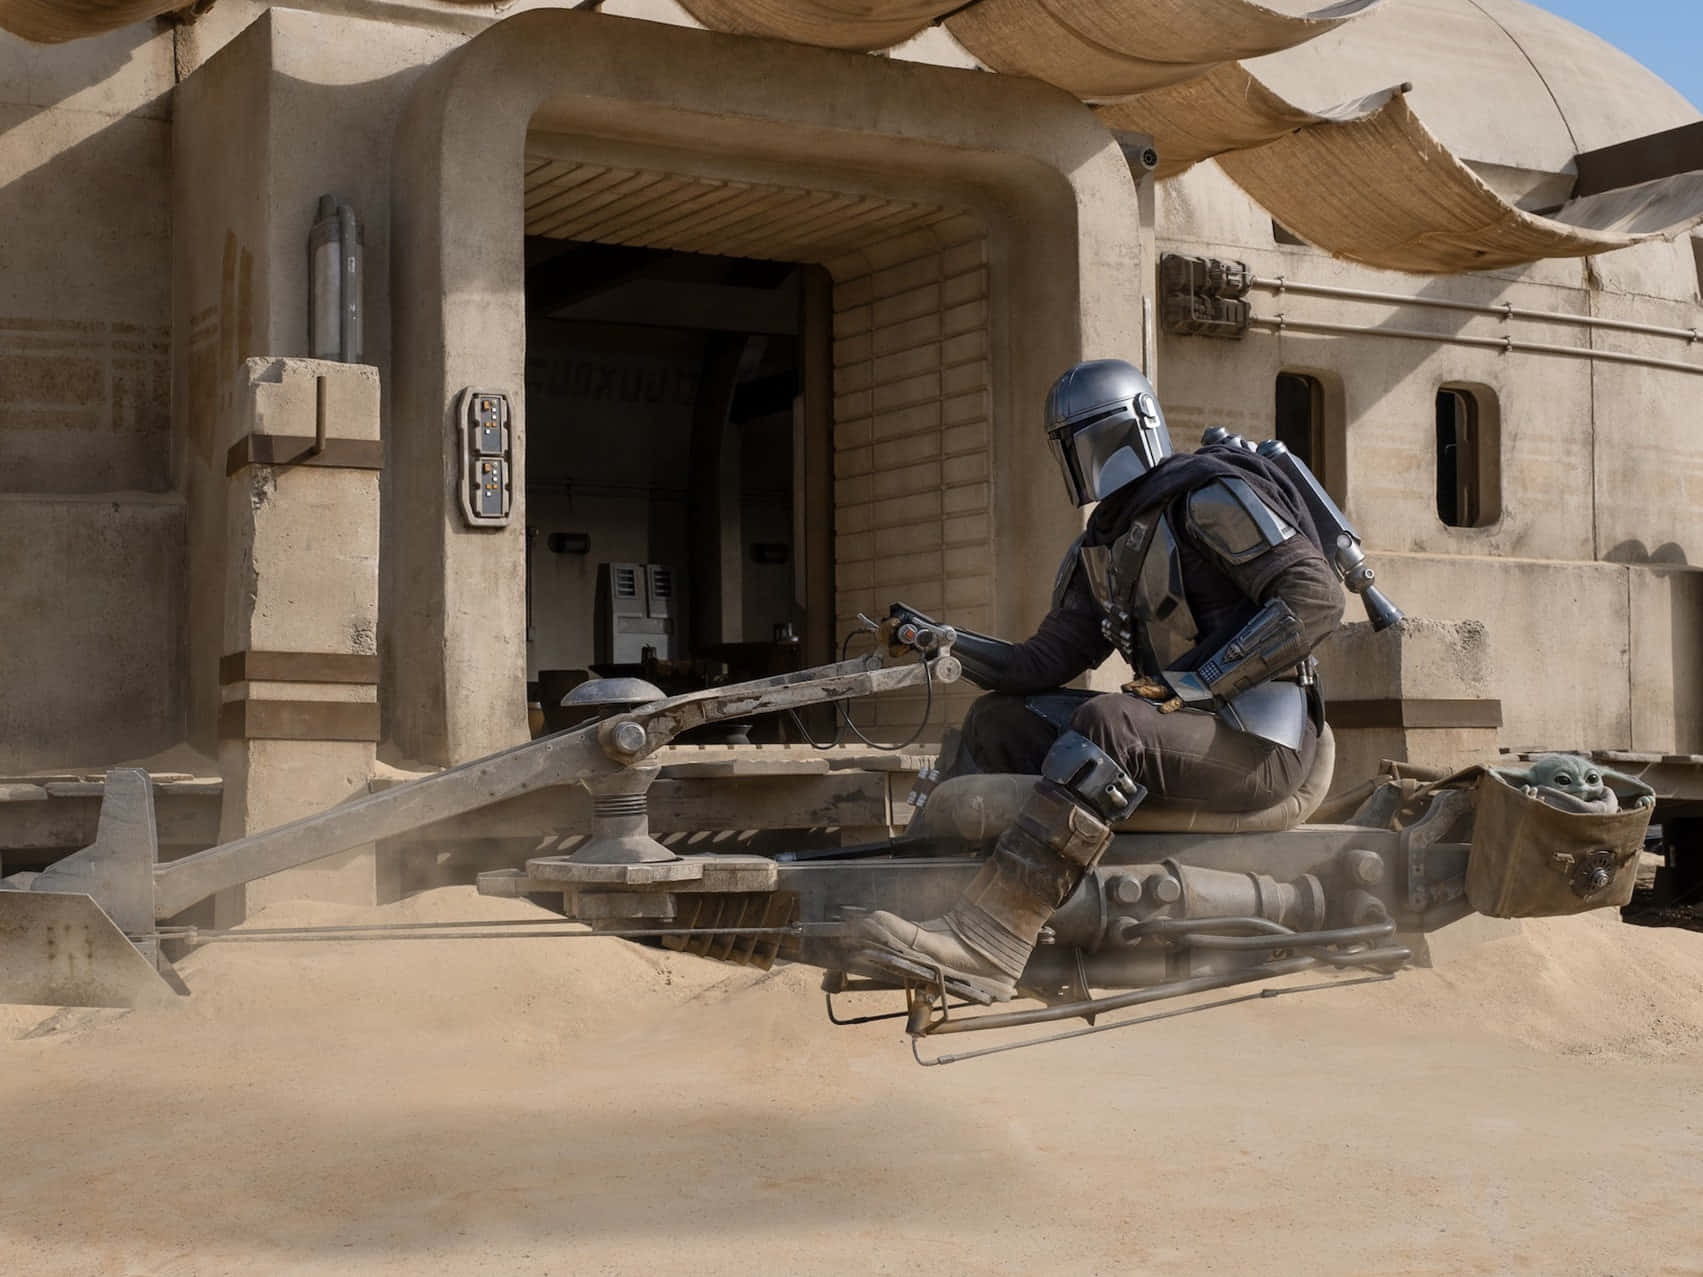 The Mighty Mandalorian in Action